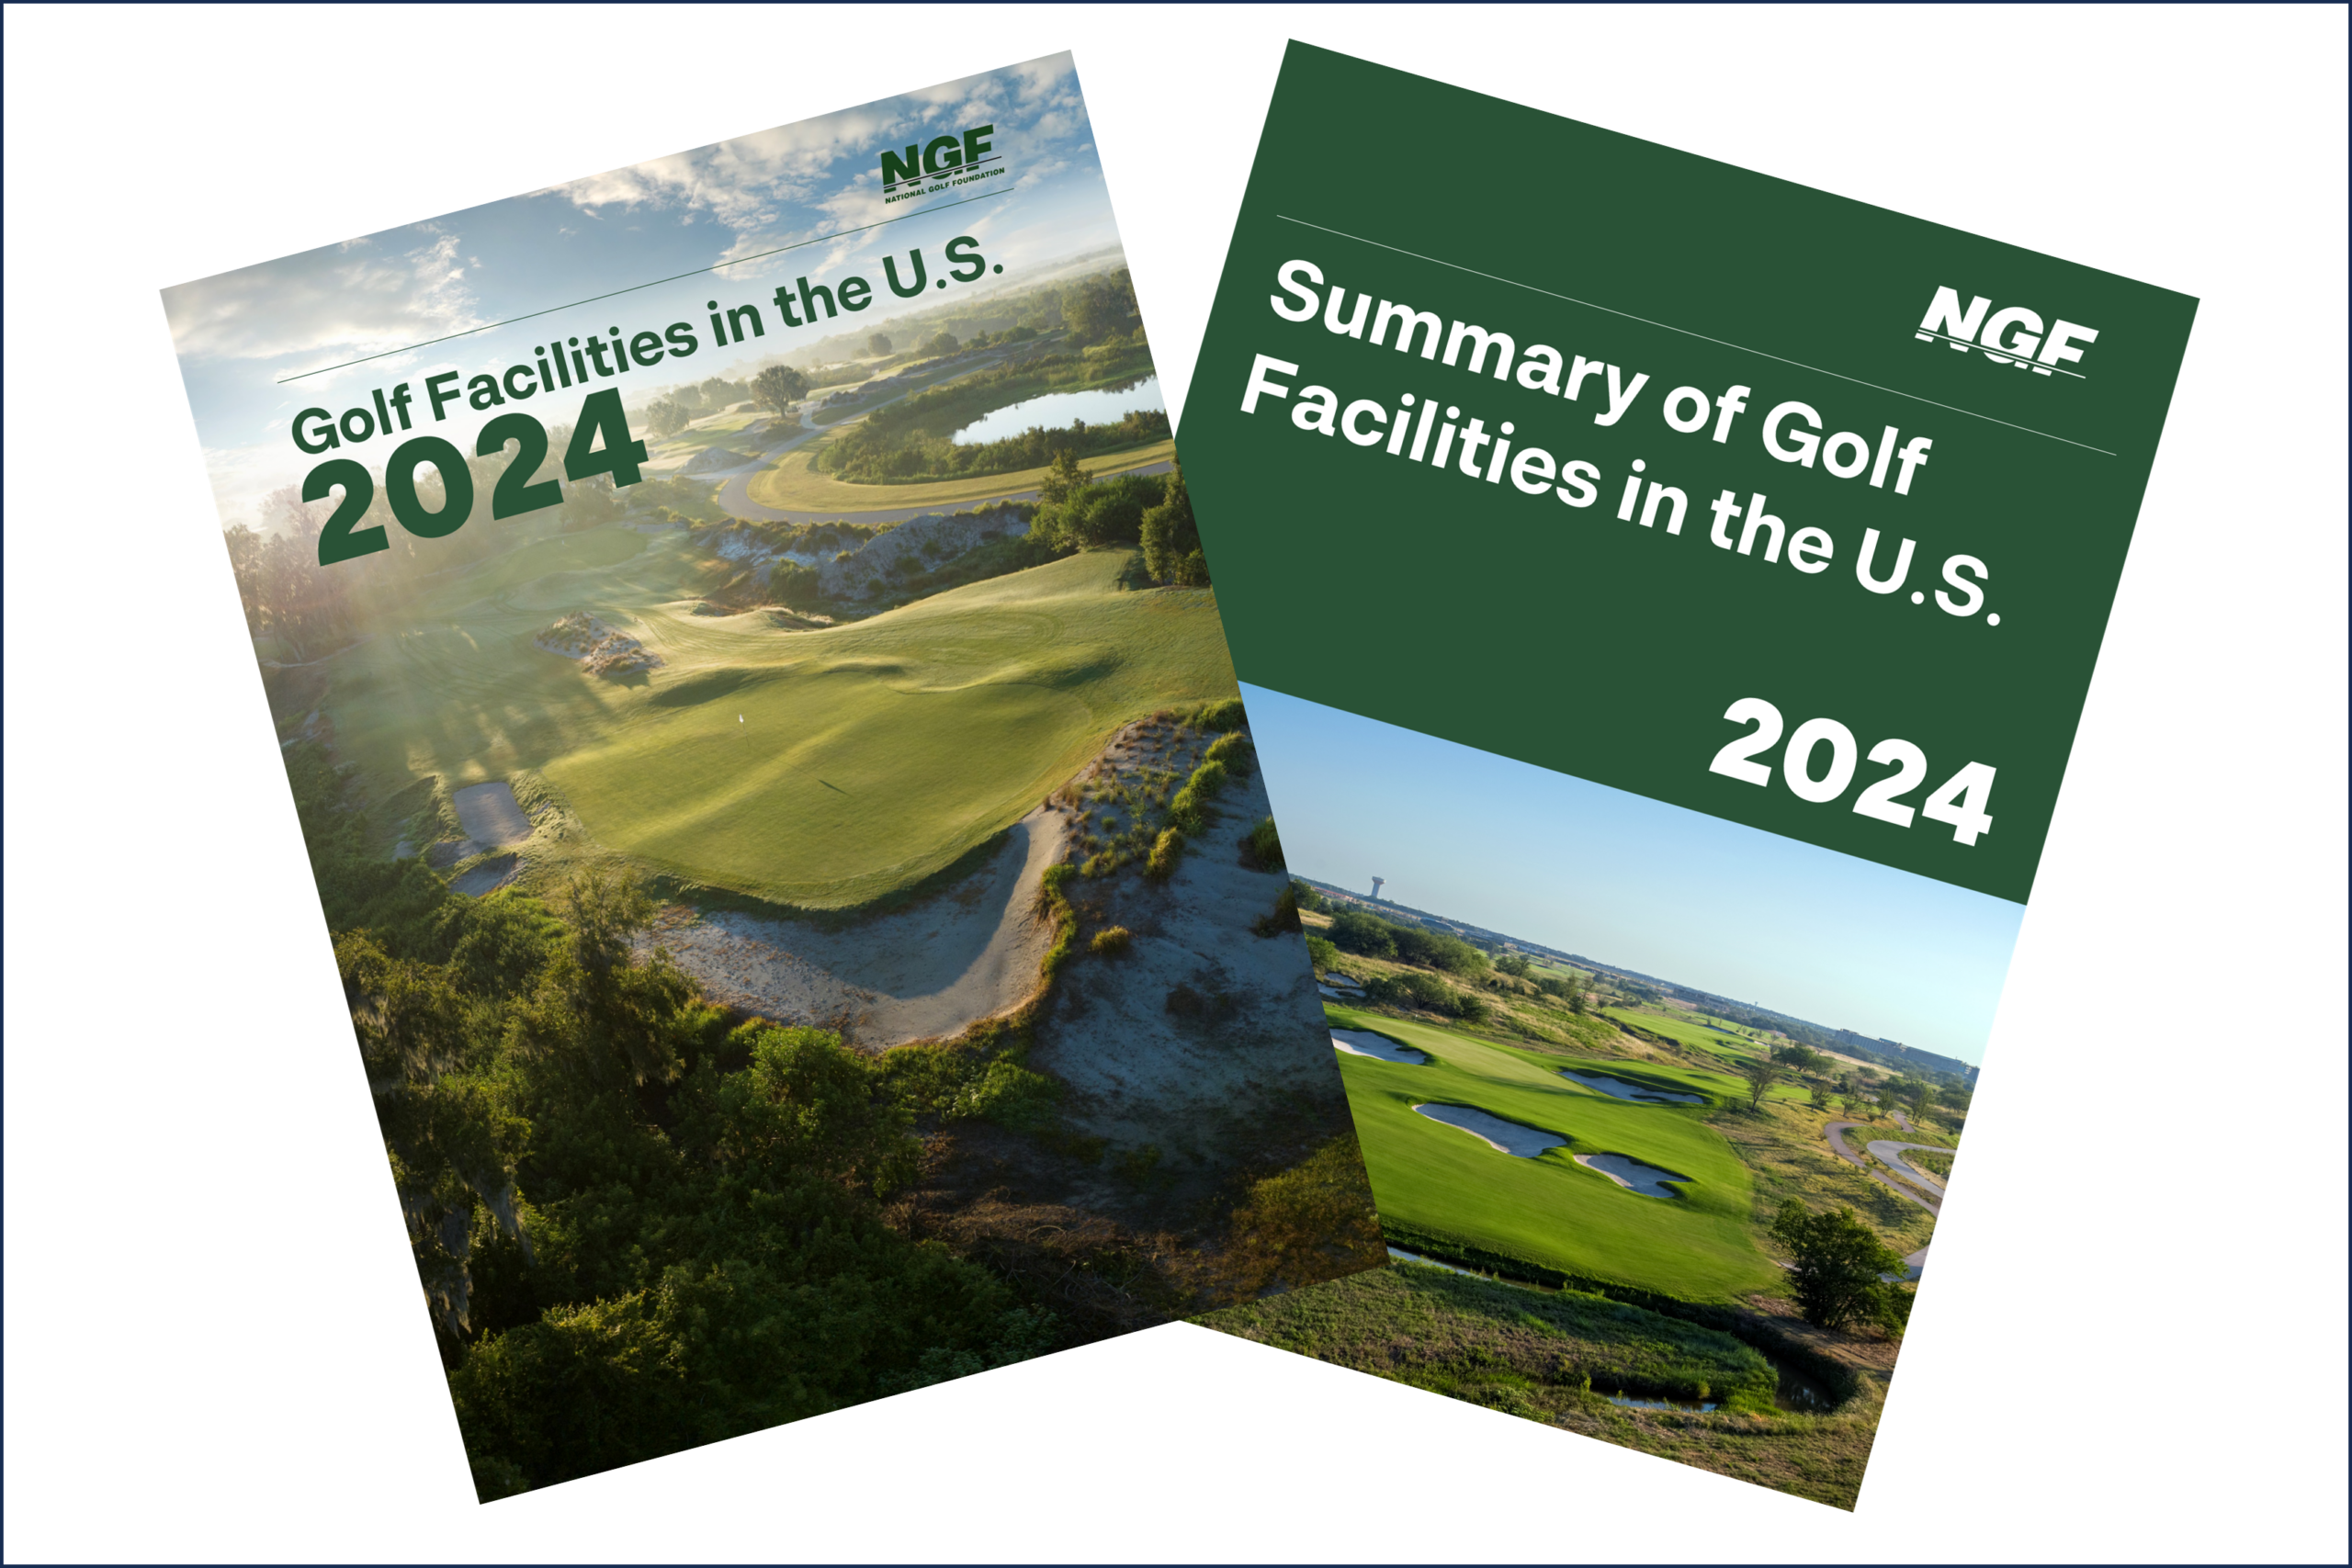 New Golf Facilities in the U.S. Report Now Available